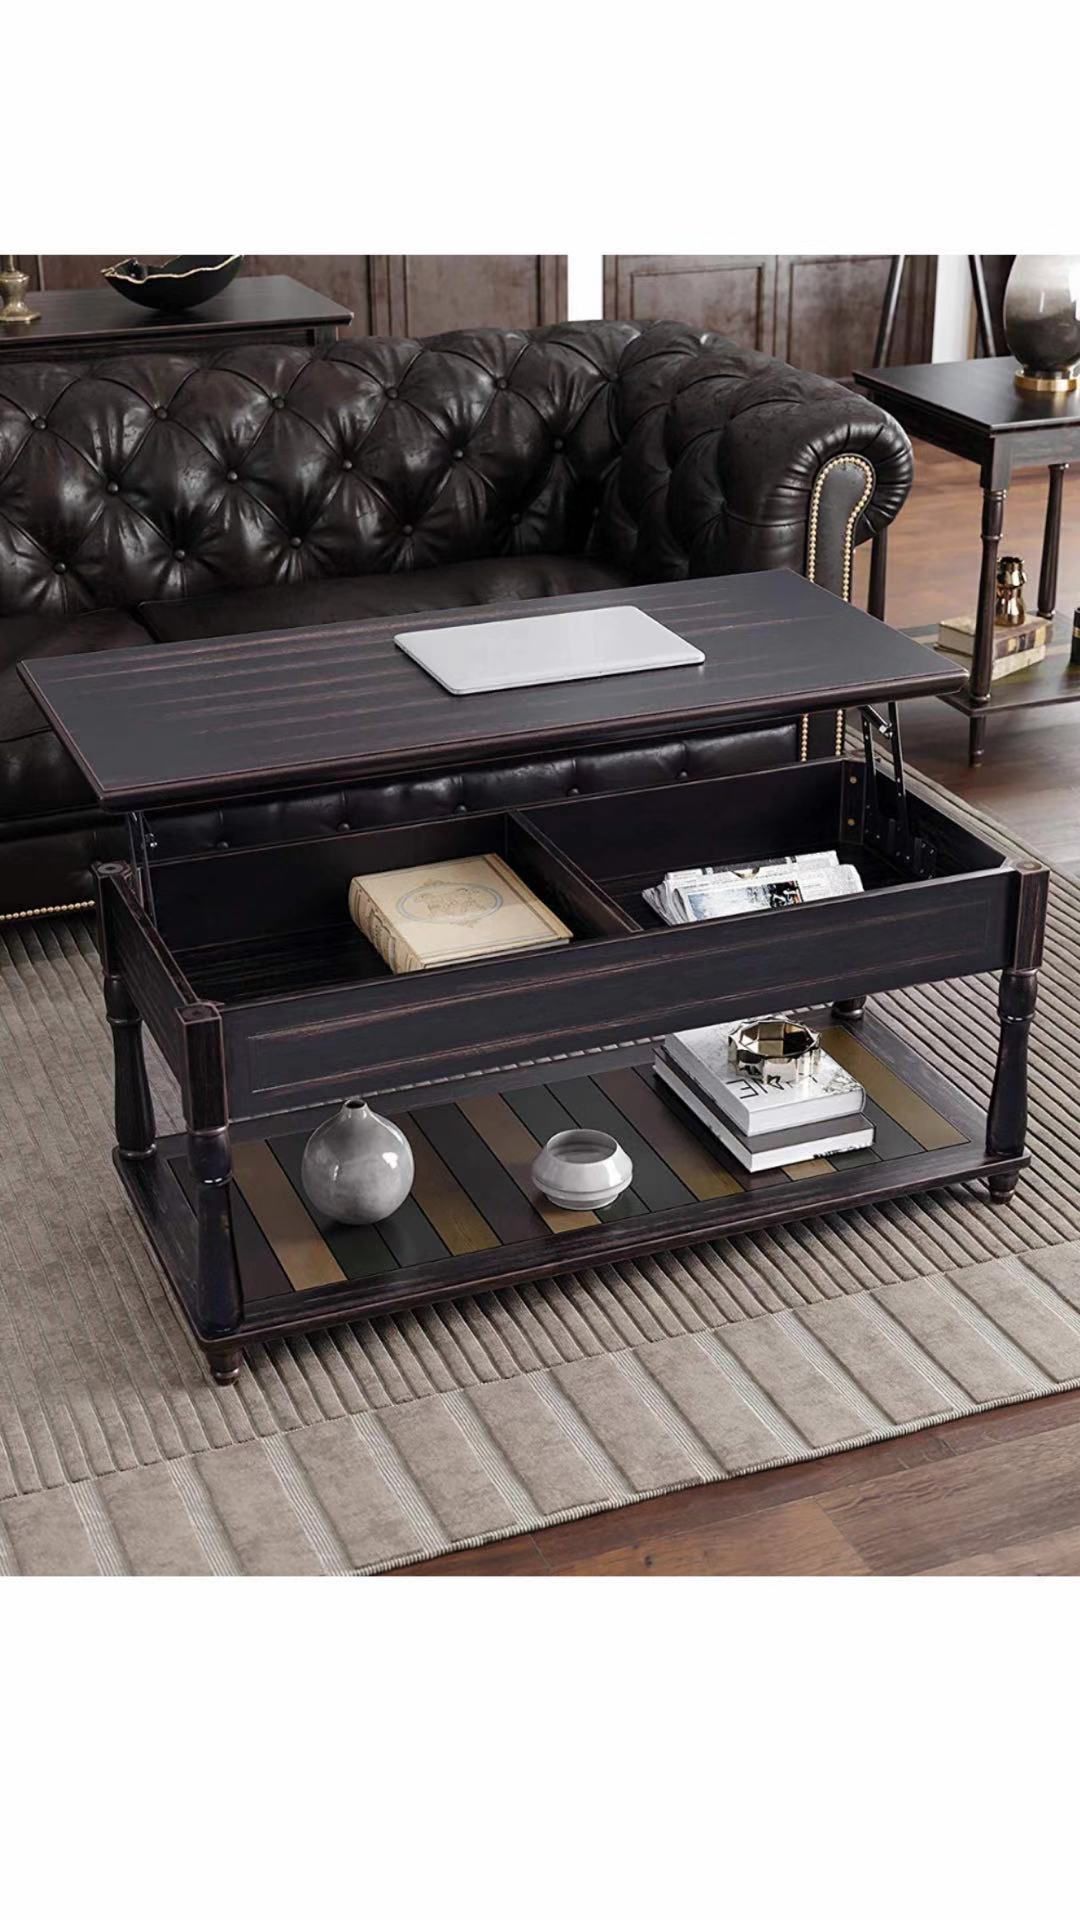 Lift-Top Coffee Table with Turned Real Wood Legs and Lower Shelf, 2 Hidden Storage Compartment, Assembly Without Tools for Living Room Home Office Di